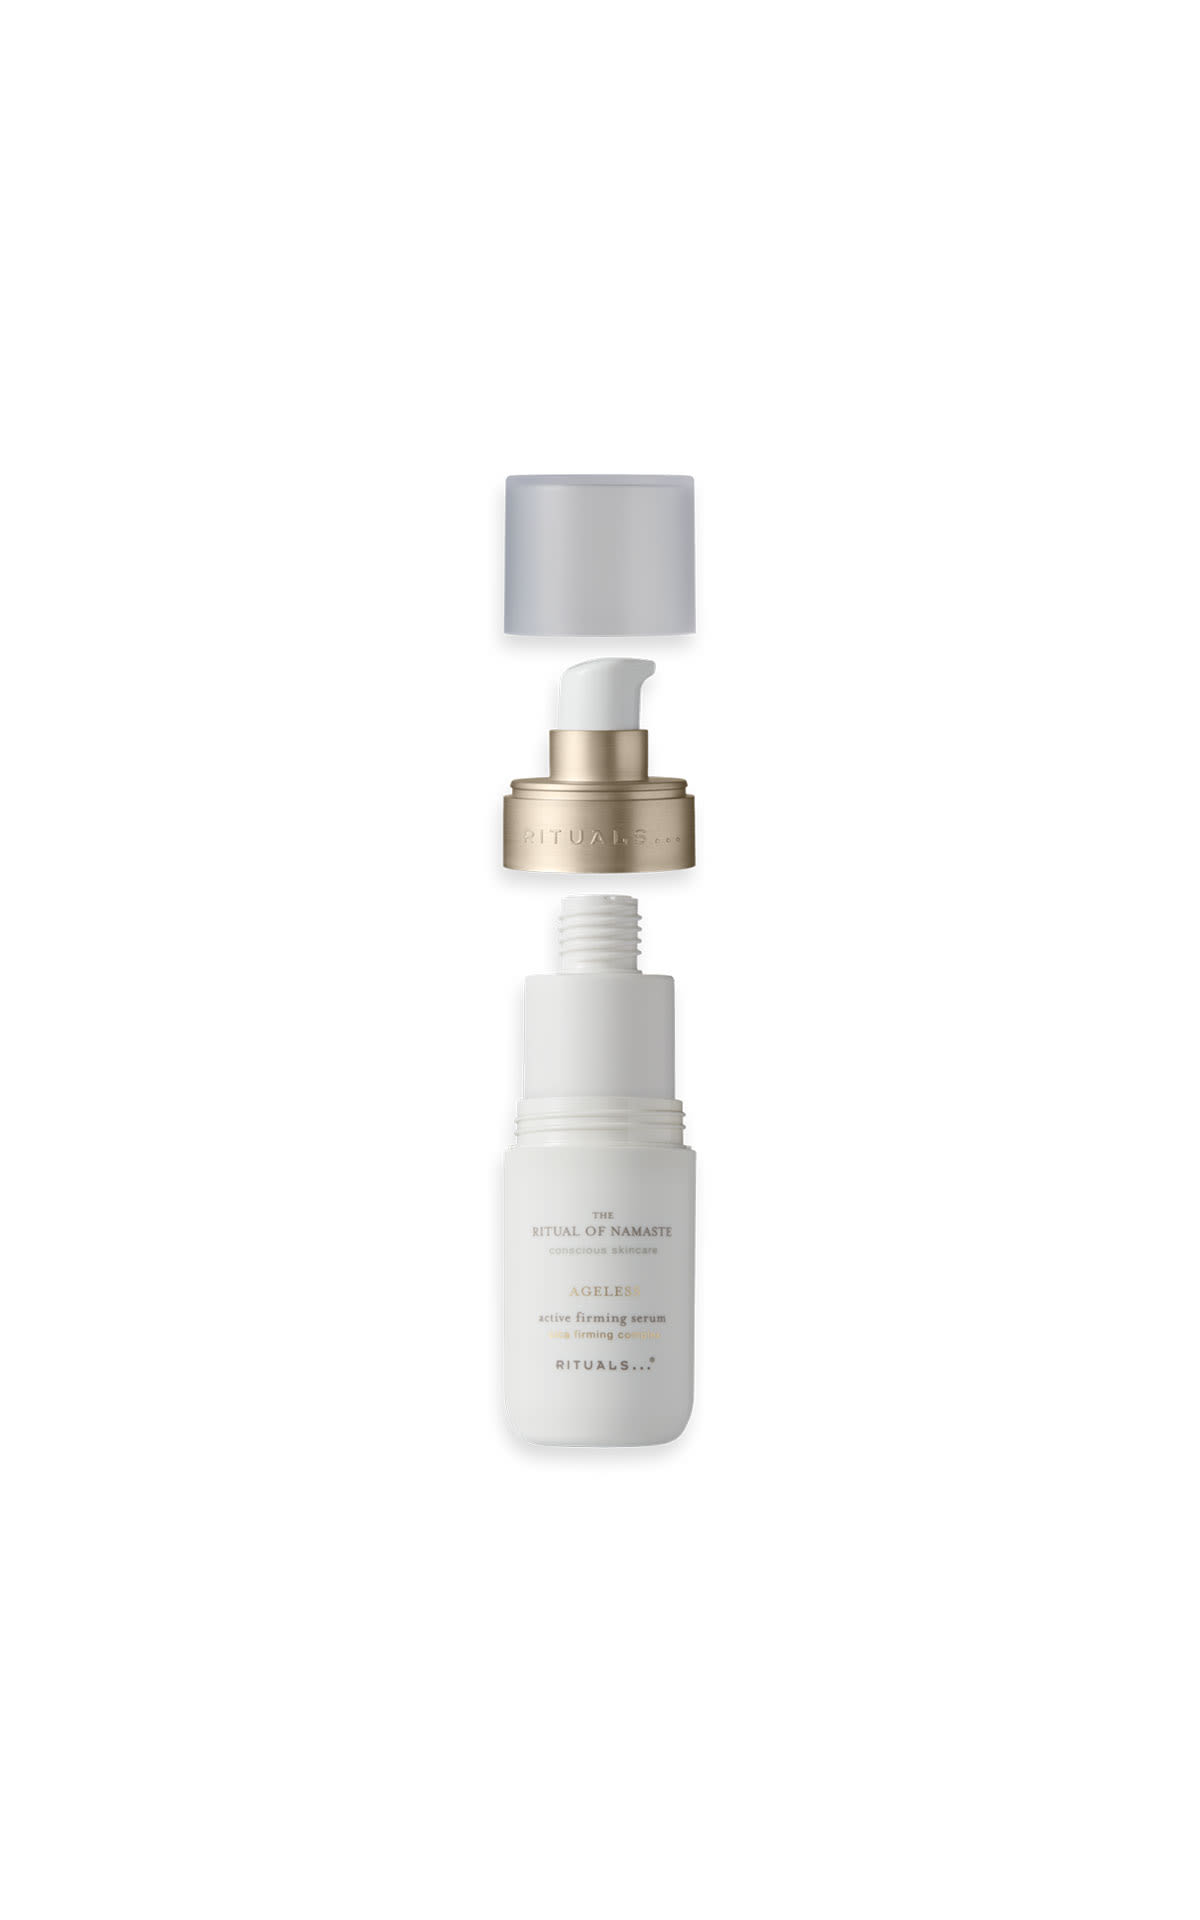 Rituals The ritual of namaste ageless firming serum refill from Bicester Village